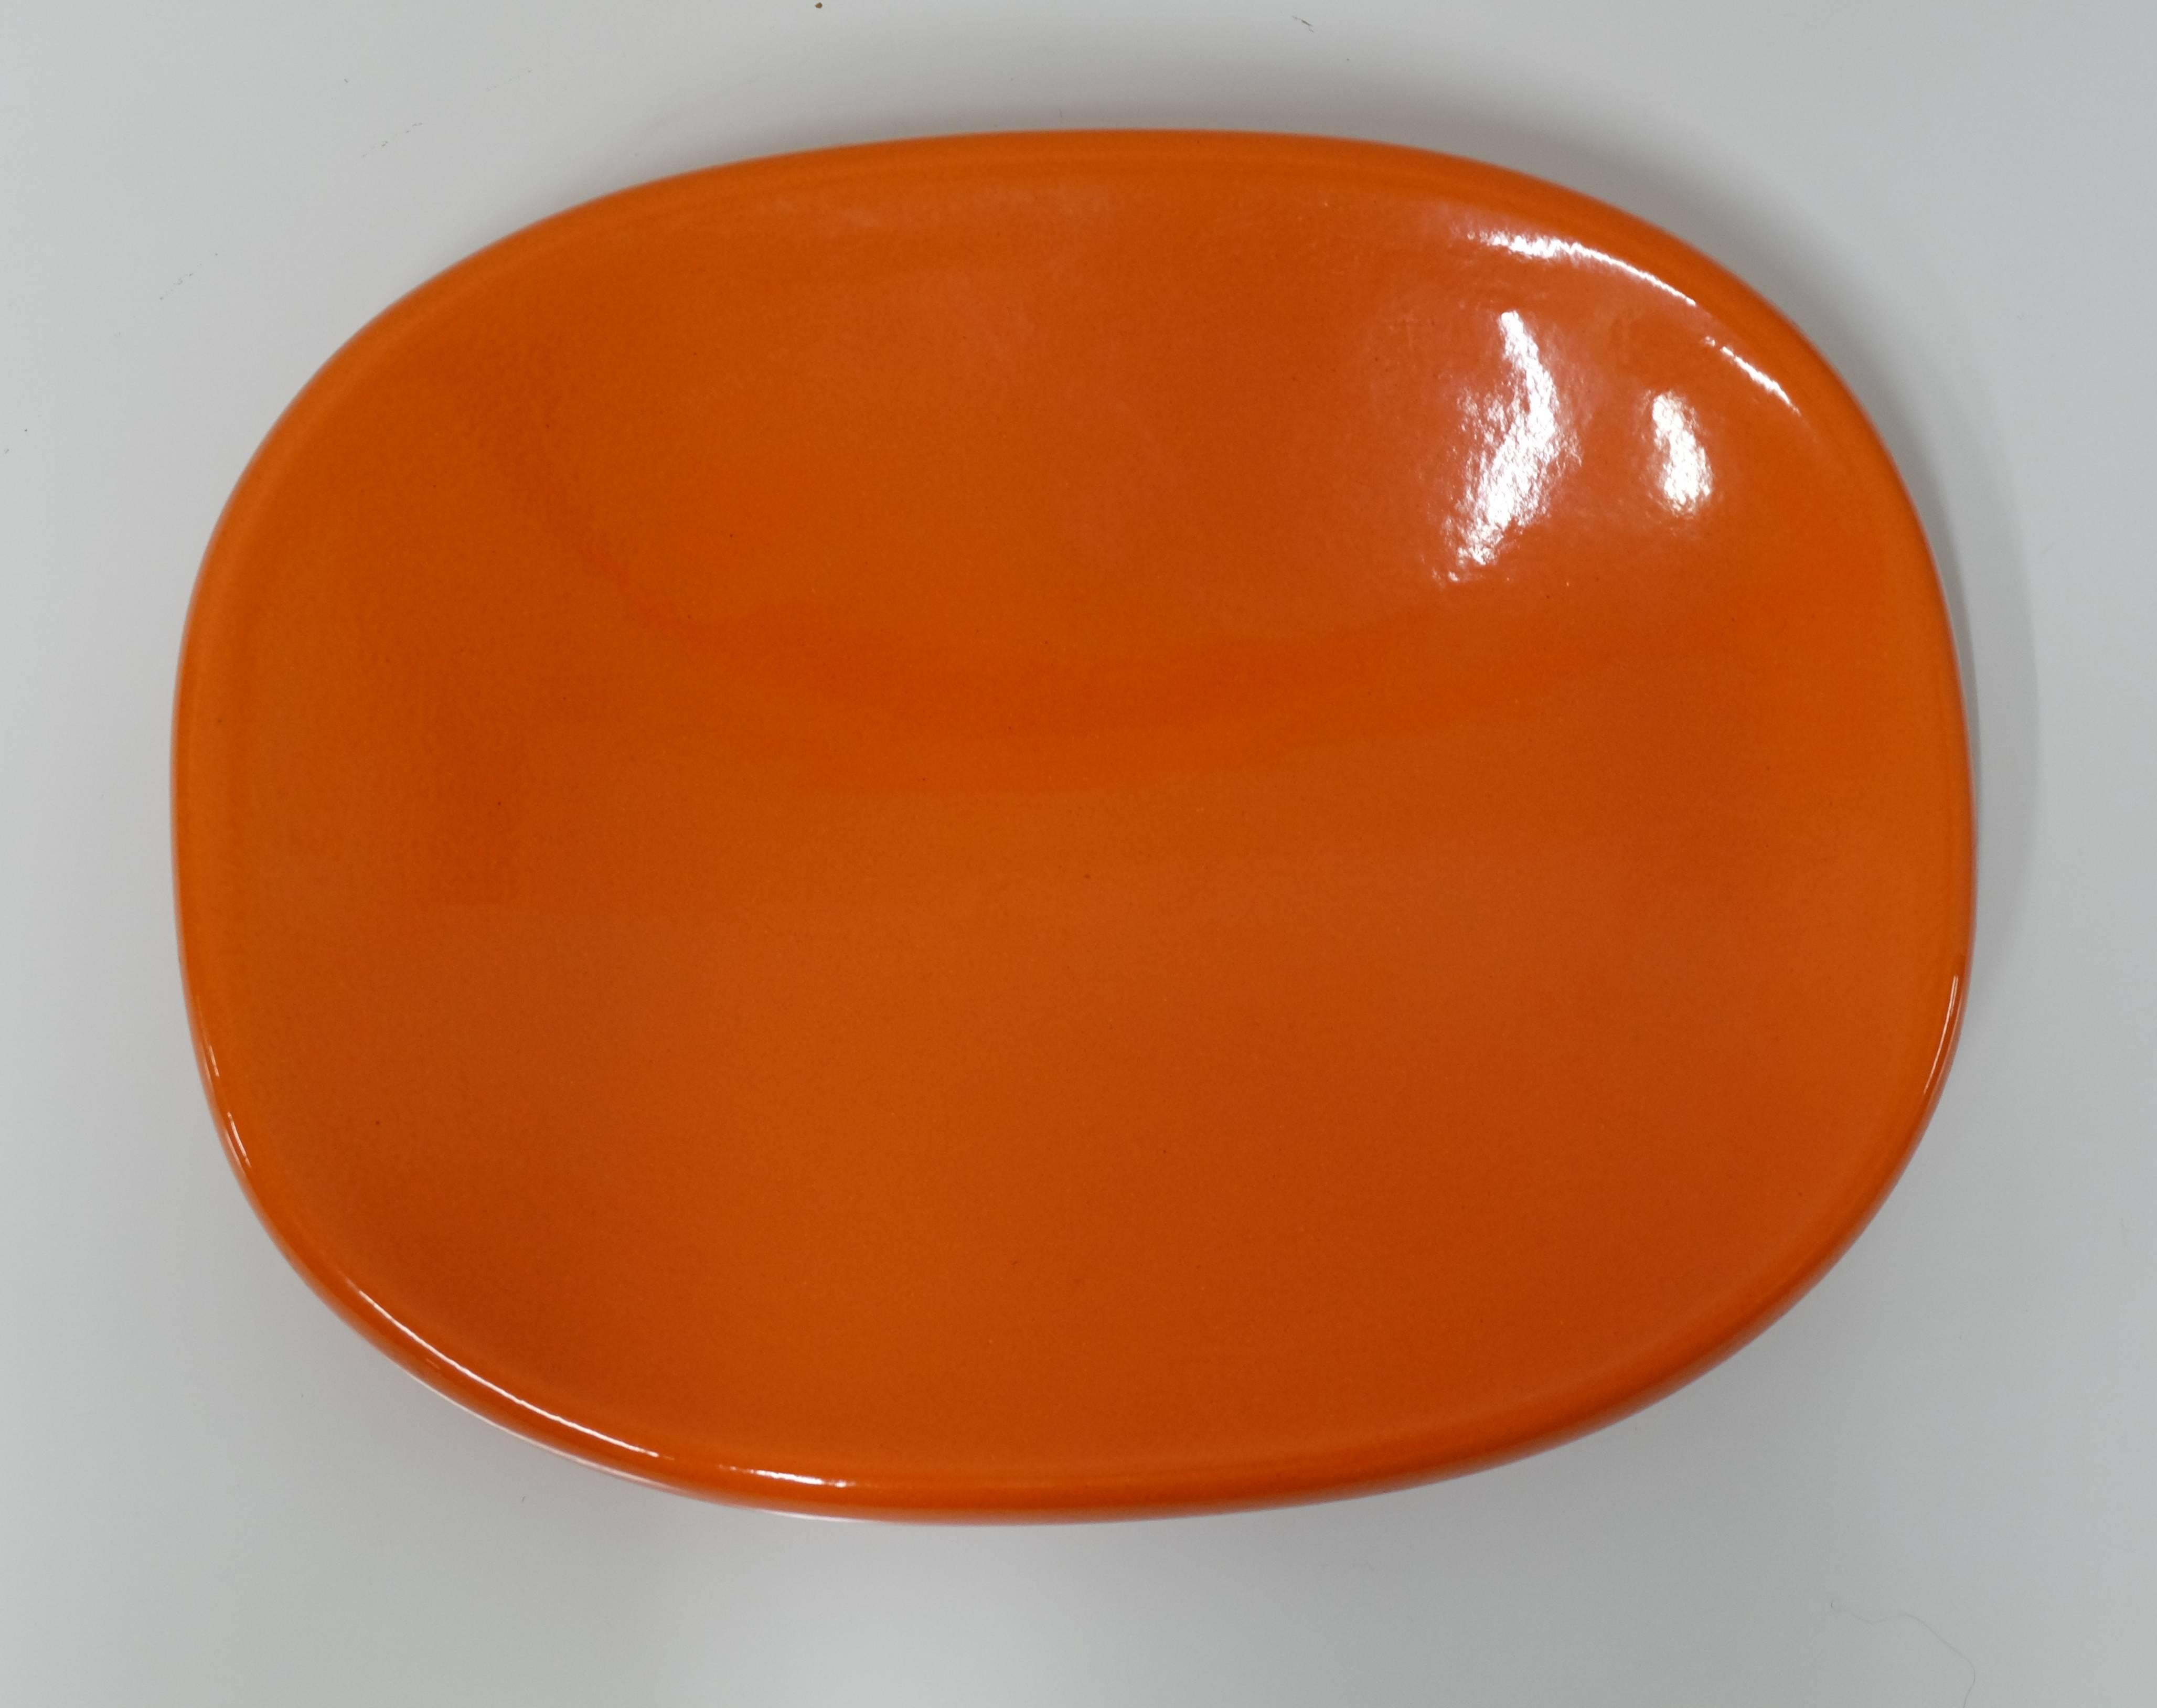 Rare oval orange dish designed by Arch. Angelo Mangiarotti for Danese Milano Italy.
Manufacturer mark underneath.
Perfect condition.